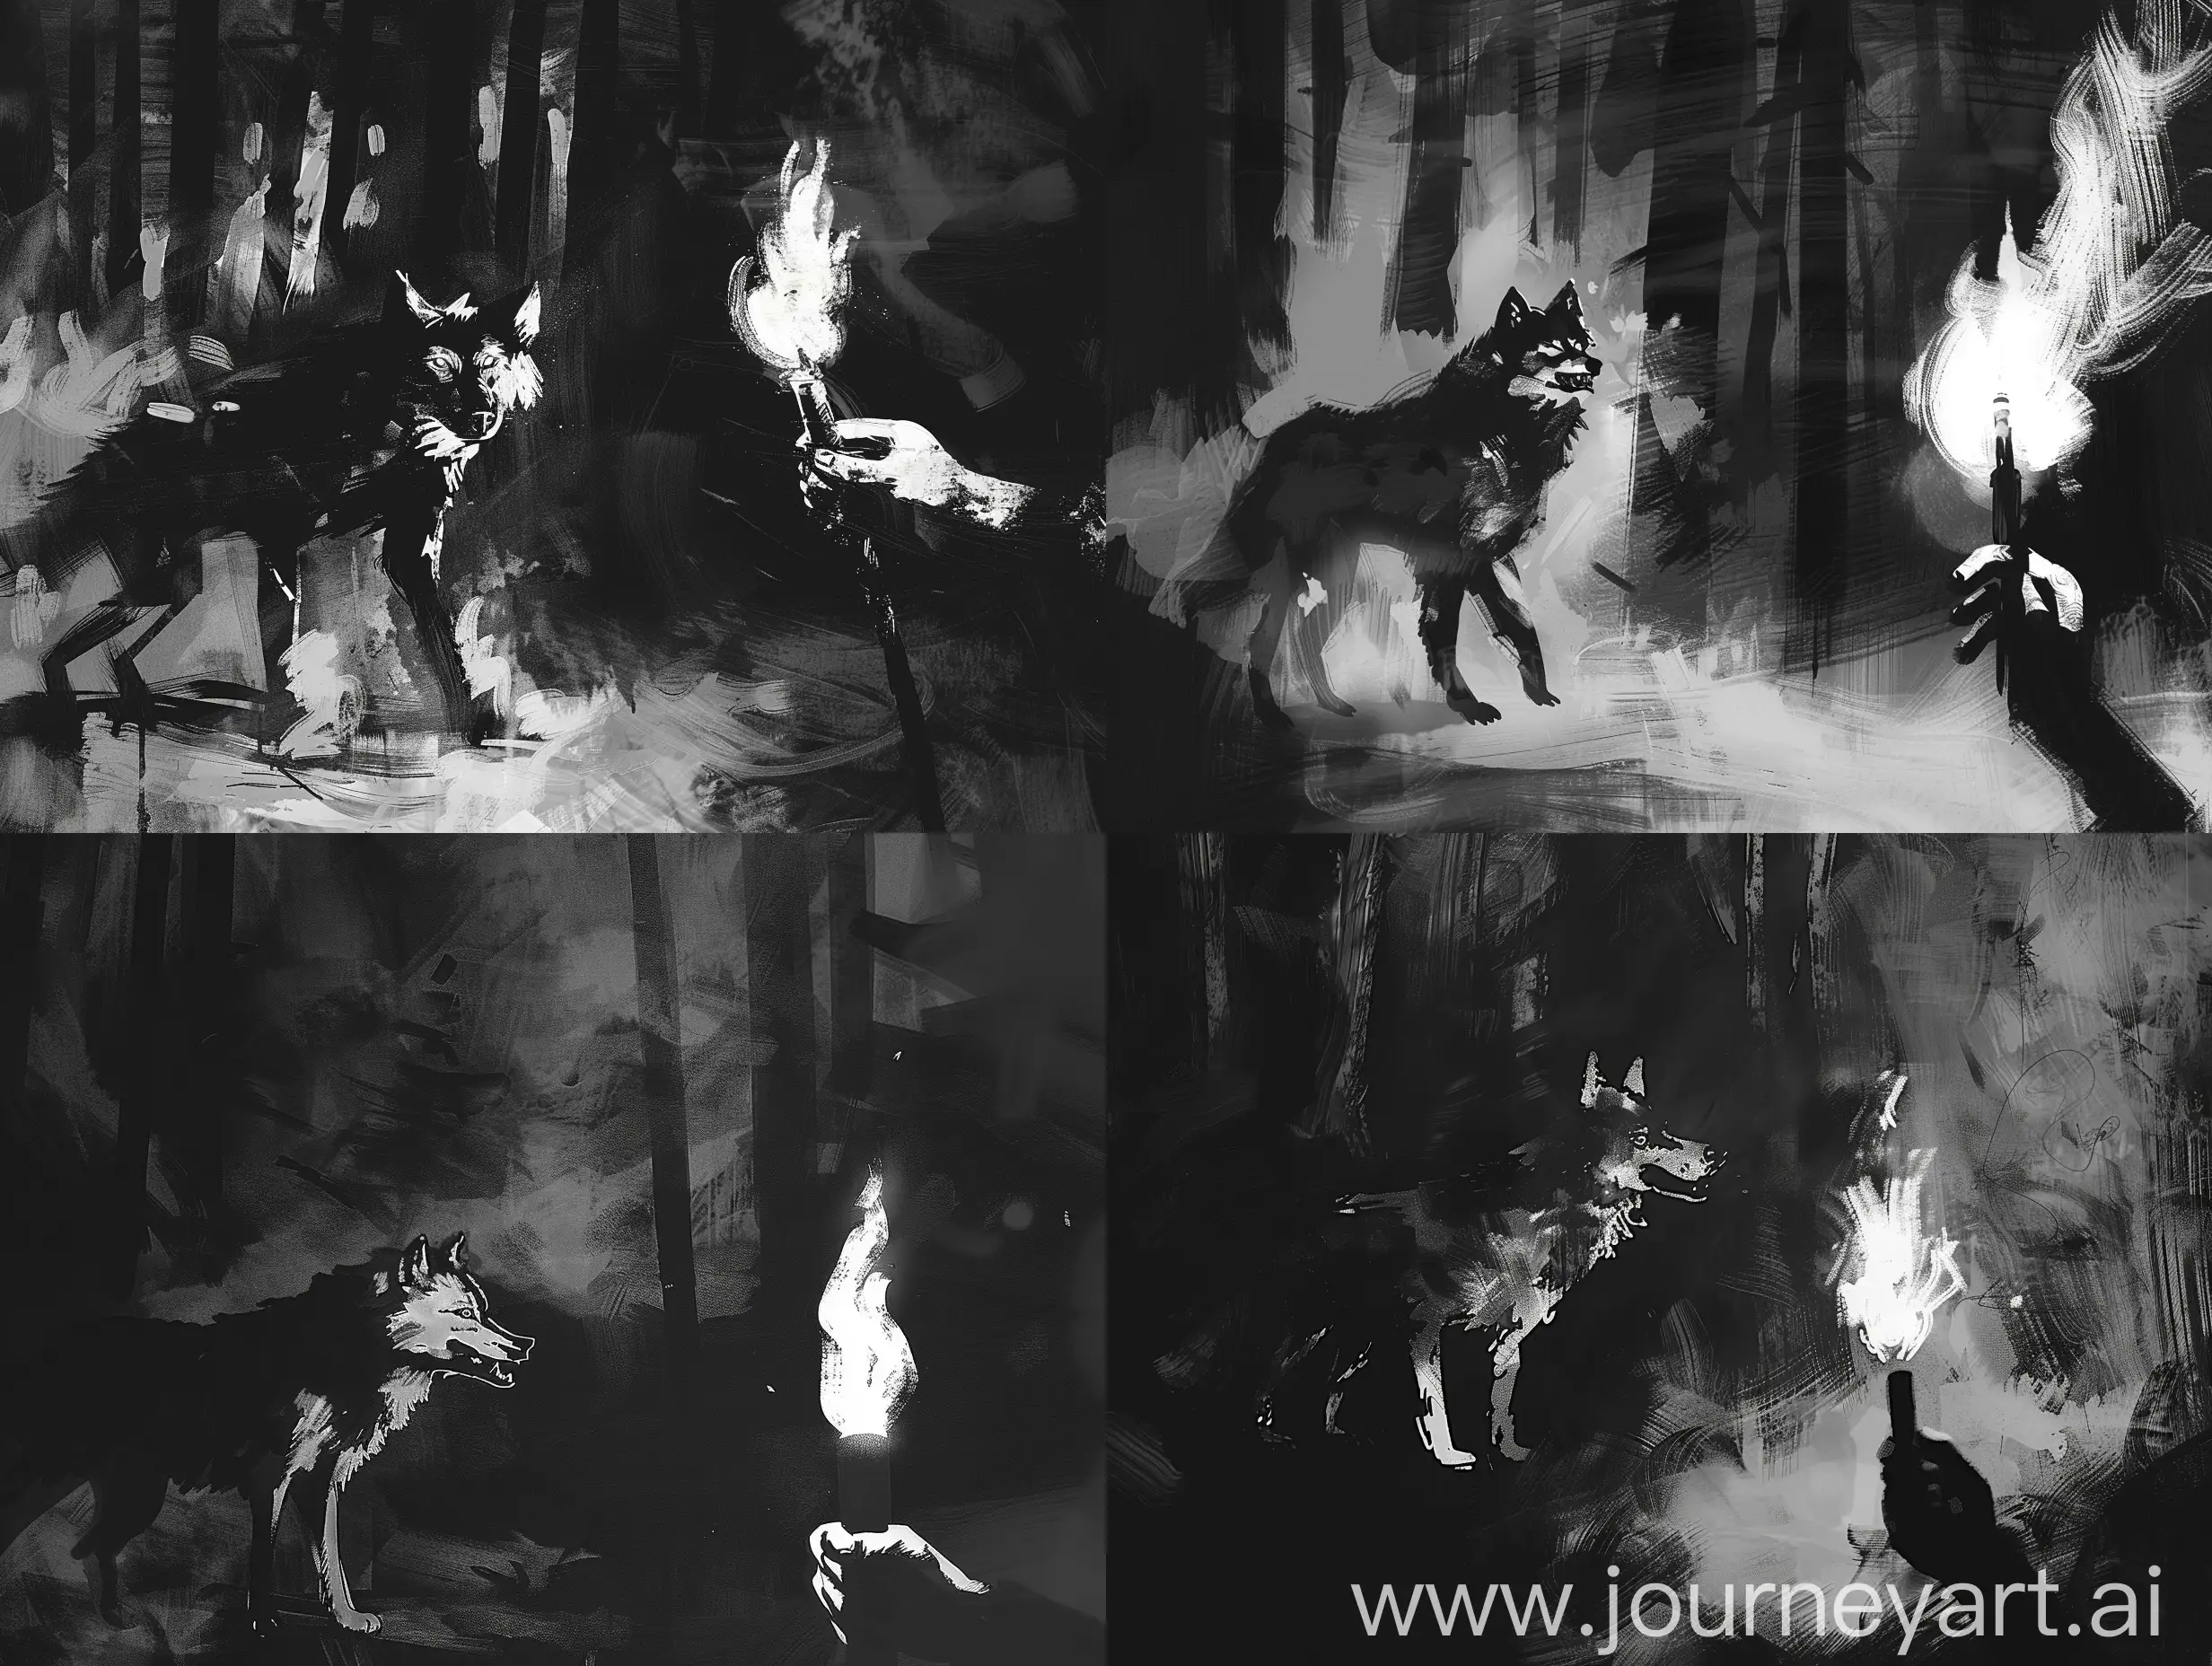 Minimalist-Black-and-White-Painting-of-a-Torchlit-Wolf-in-a-Forest